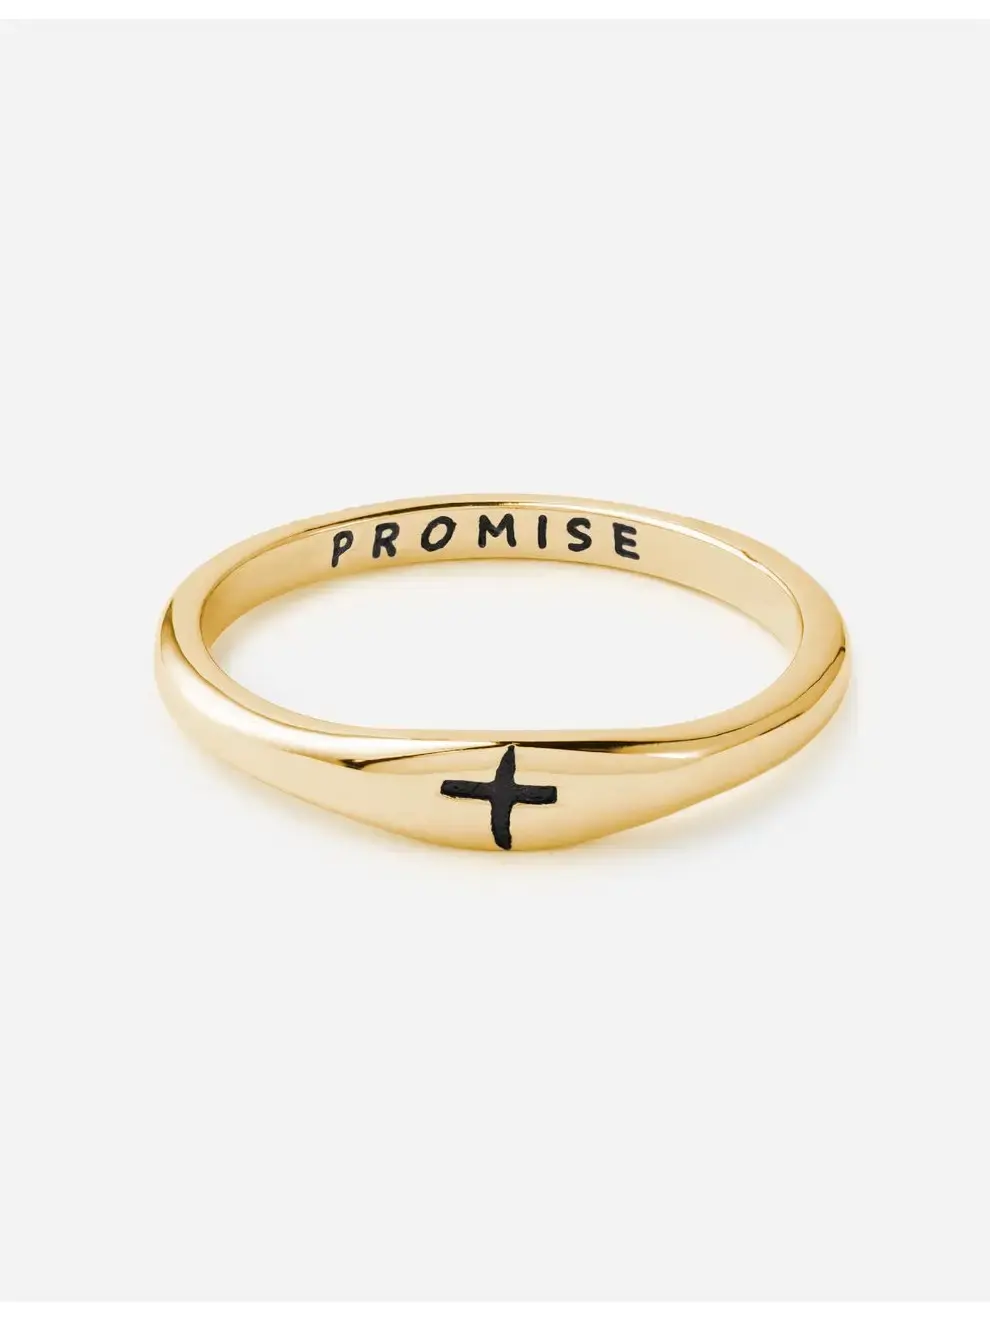 Gold Promise Ring - Size 7